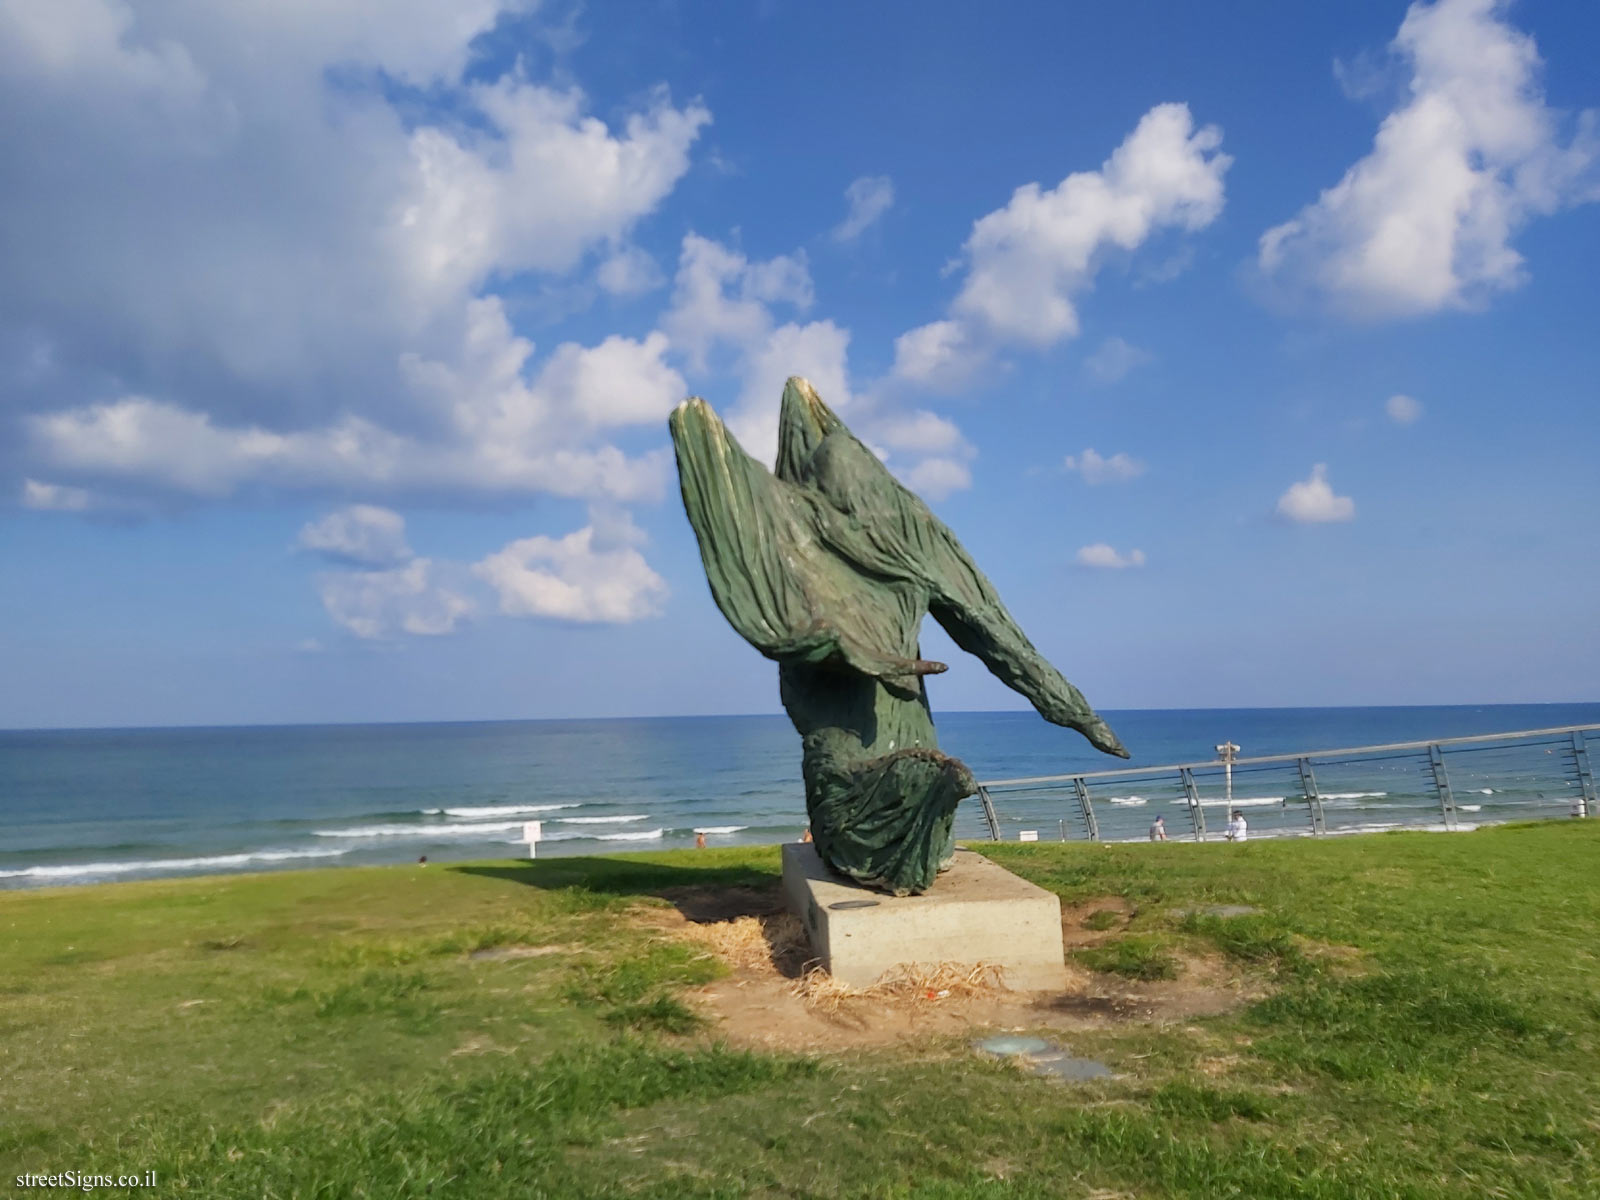 "Woman in the Wind" - Outdoor sculpture by Ilana Goor - Charles Clore Park, 2 Goldman St, Tel Aviv-Yafo, Israel